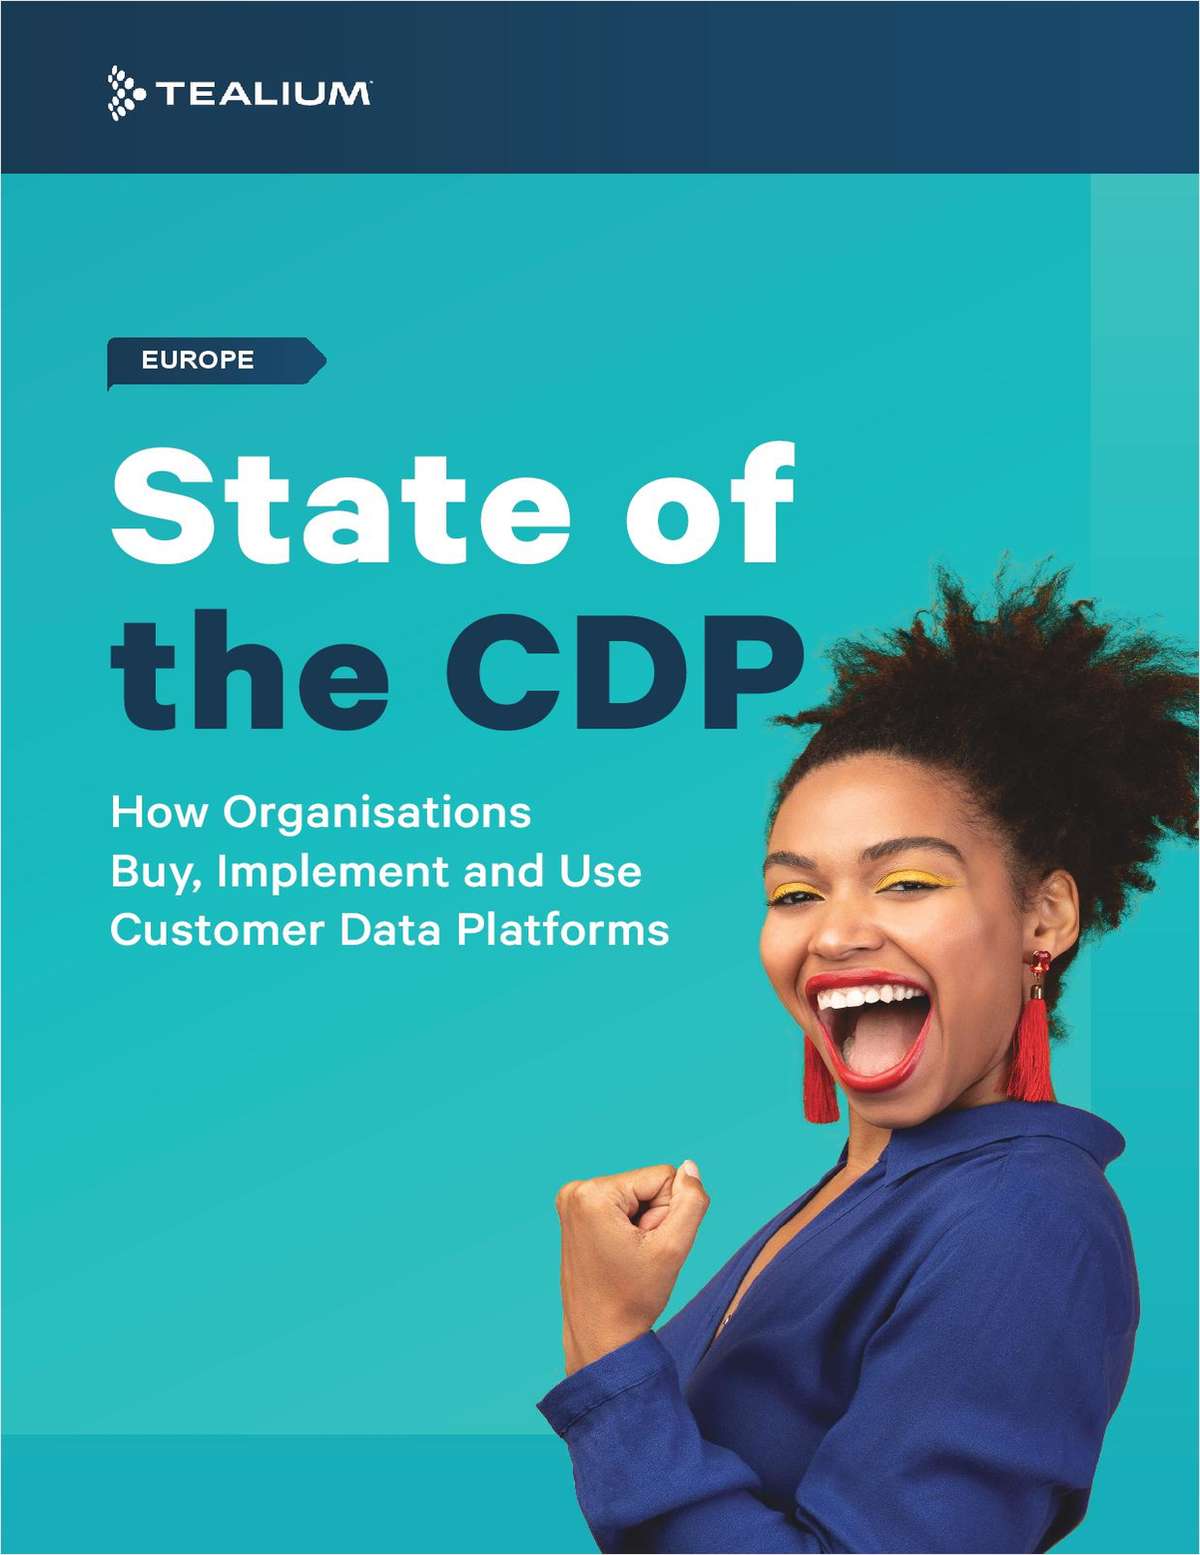 How Organizations Buy, Implement and Use Customer Data Platforms